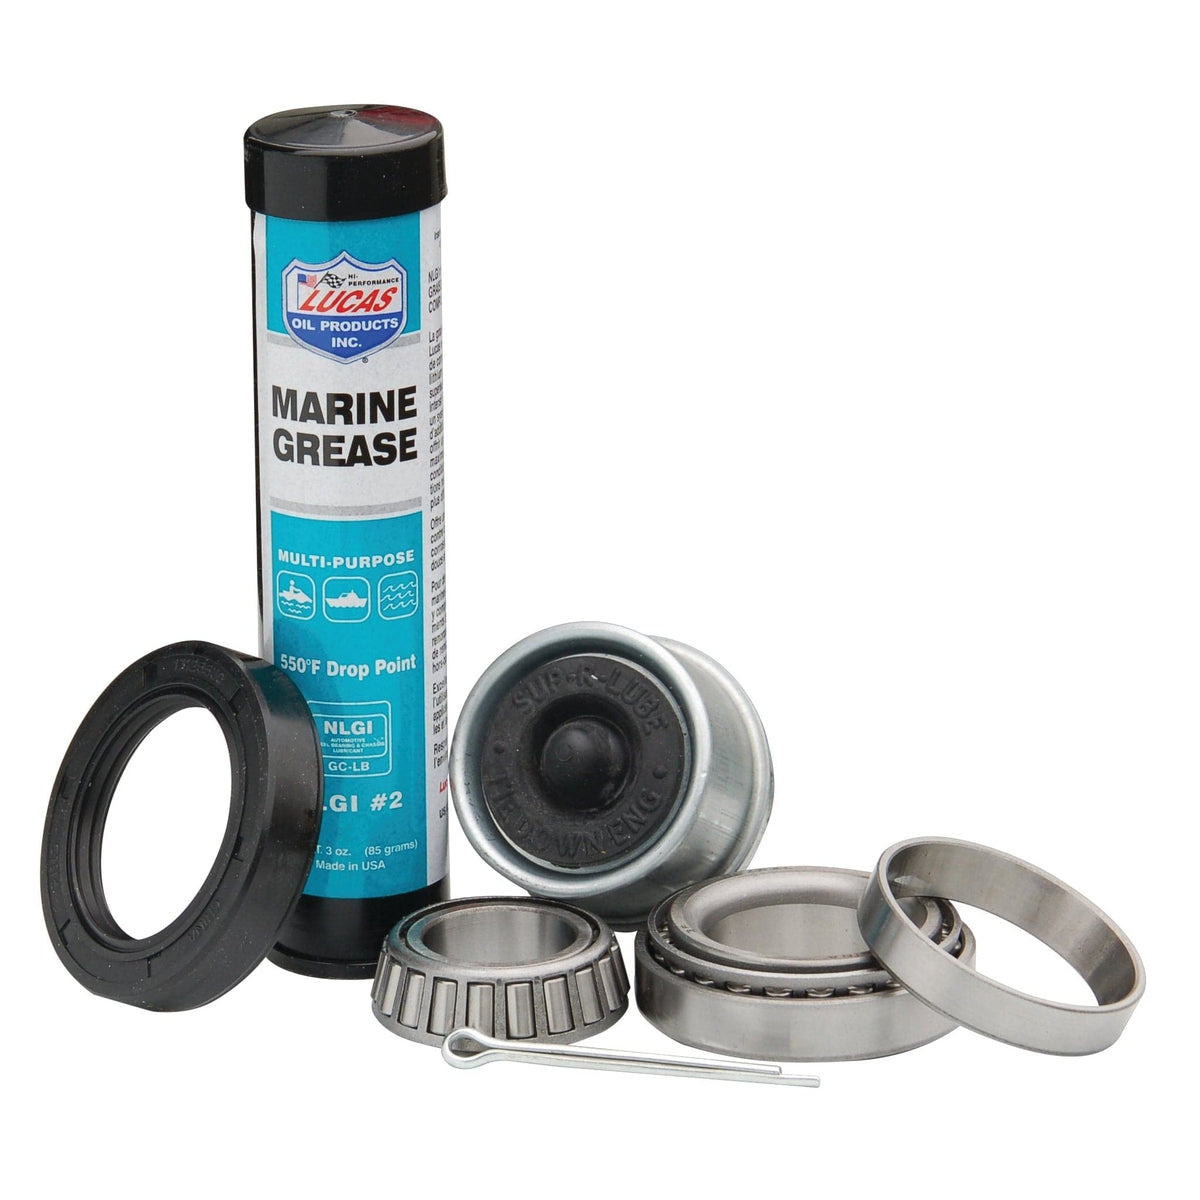 Tie Down Engineering Qualifies for Free Shipping Tie Down VTX Bearing Kit 1-3/8" x 1-1/16" with Grease 2.36" Cup #81134